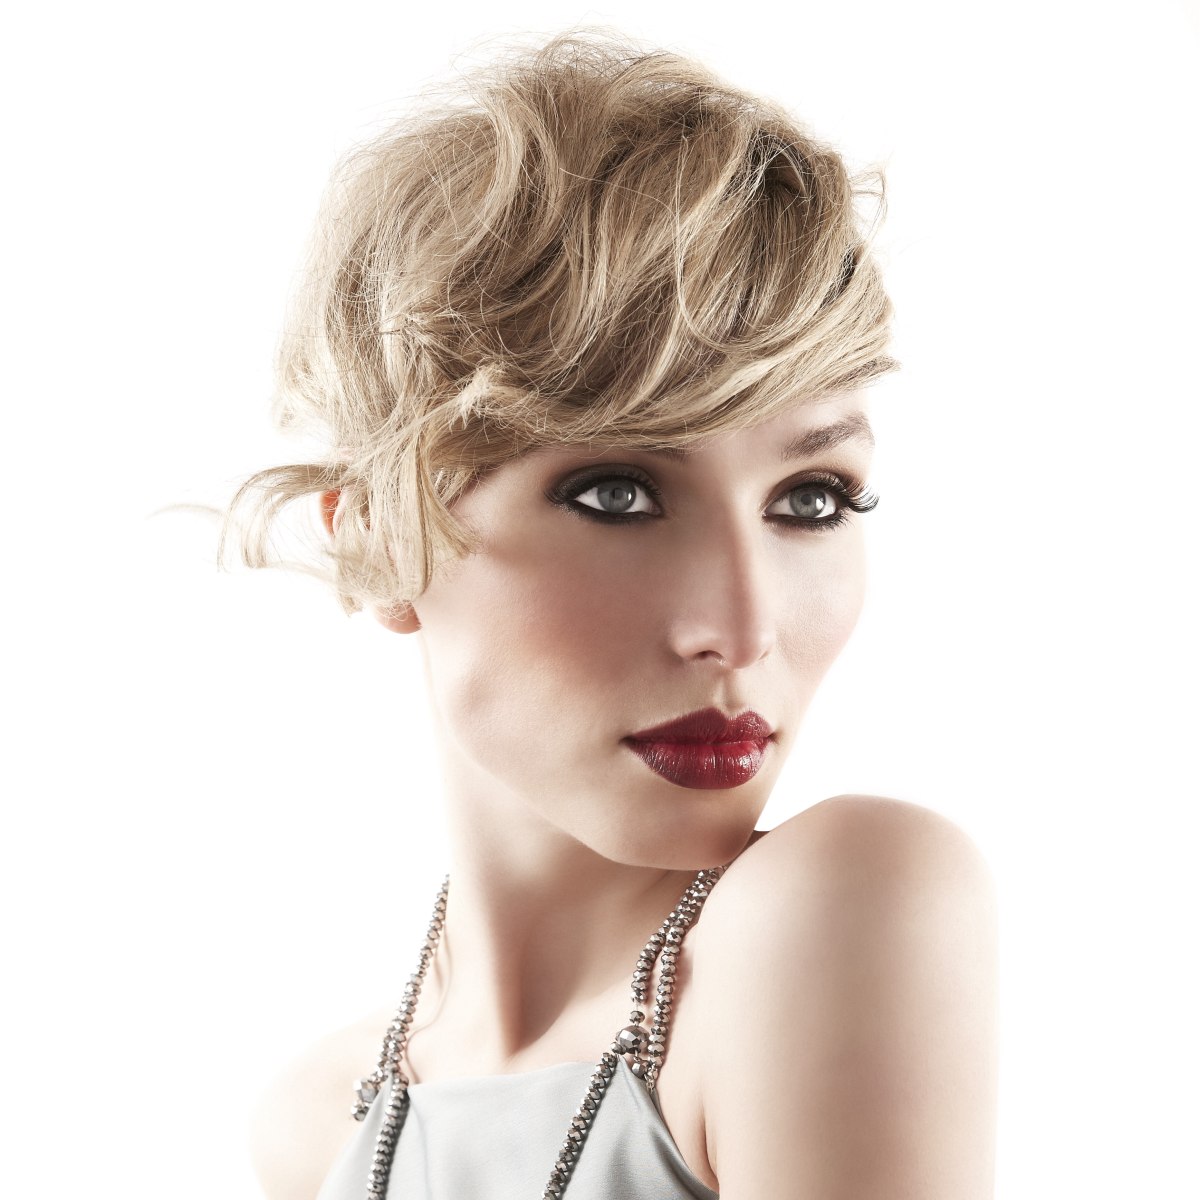 Let's Recreate The Magic Of 40's Hairstyles - K4 Fashion